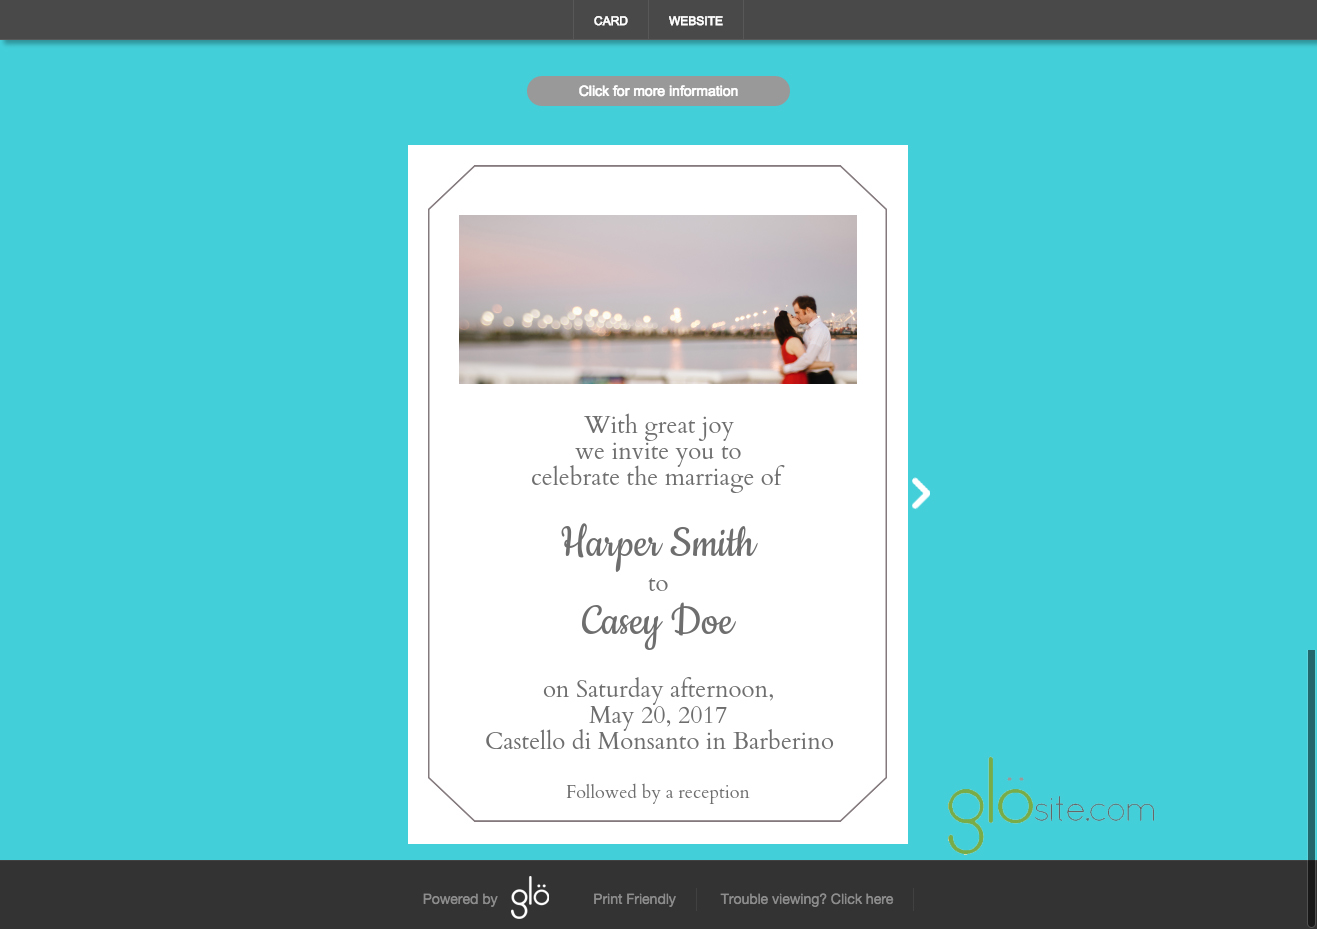 glosite email wedding invitation background color